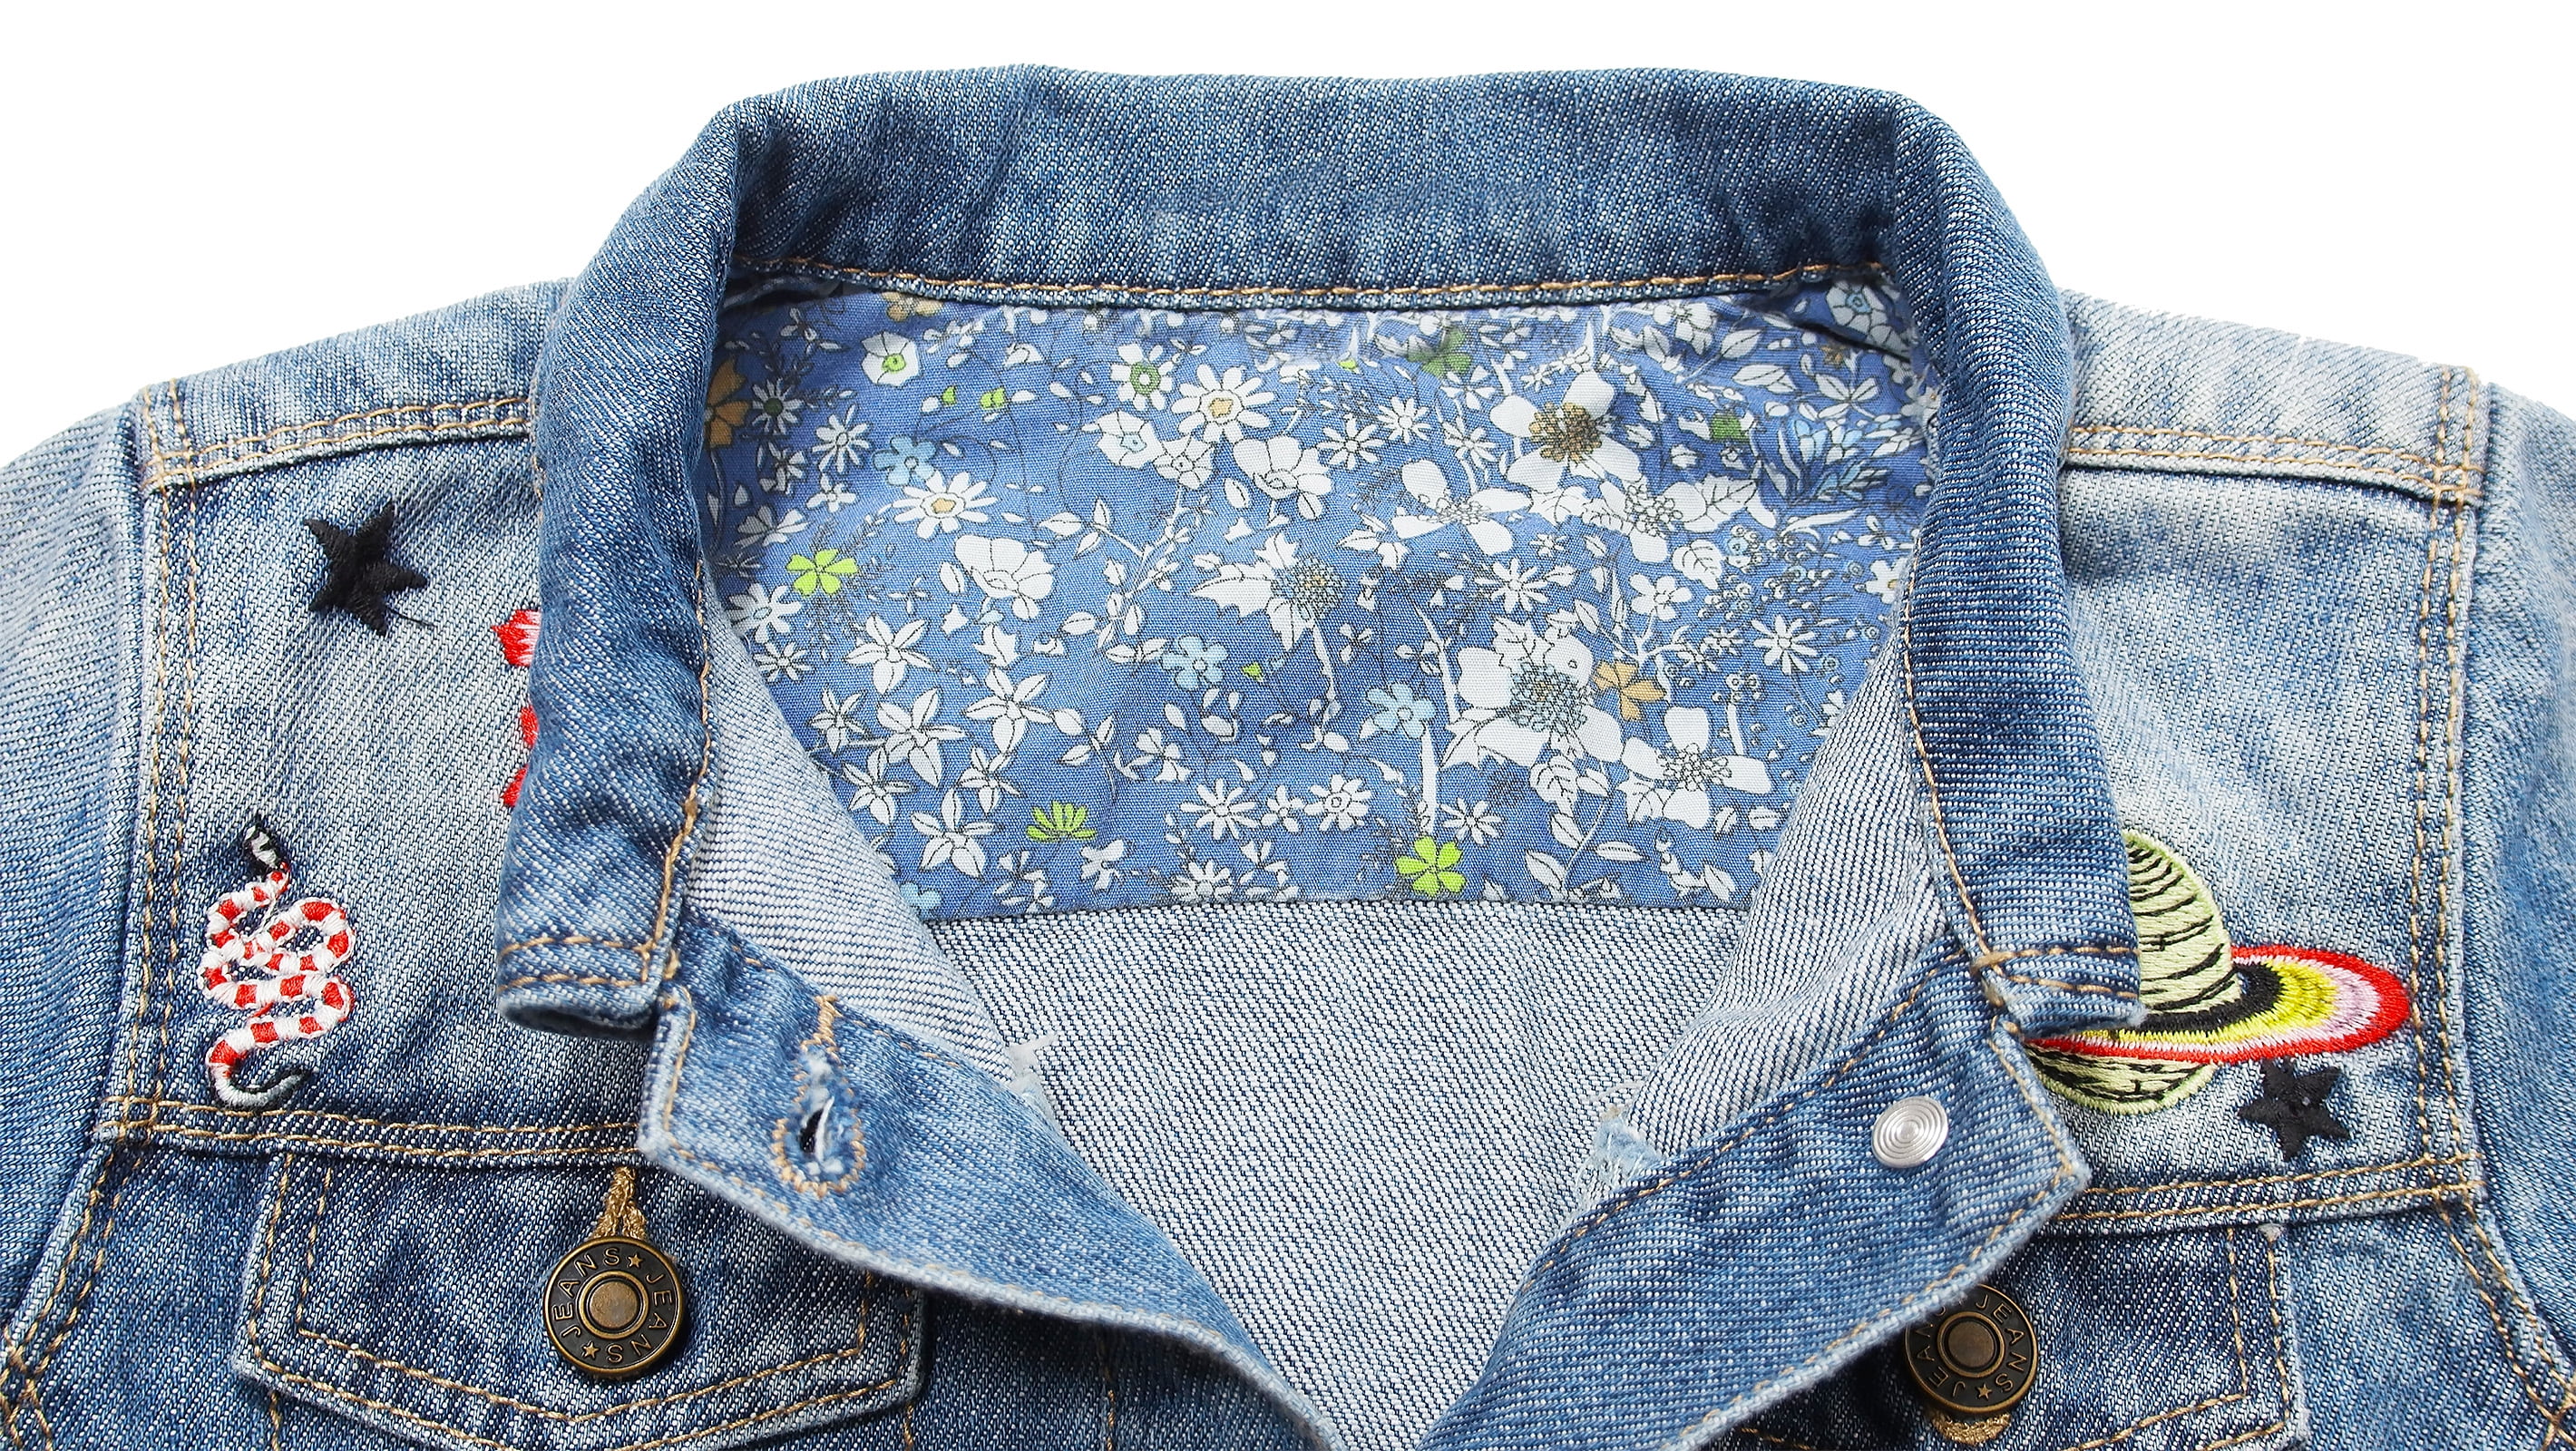 KIDSCOOL SPACE Little Girl Jean Jacket,Flower Embroidered Denim Outfits 